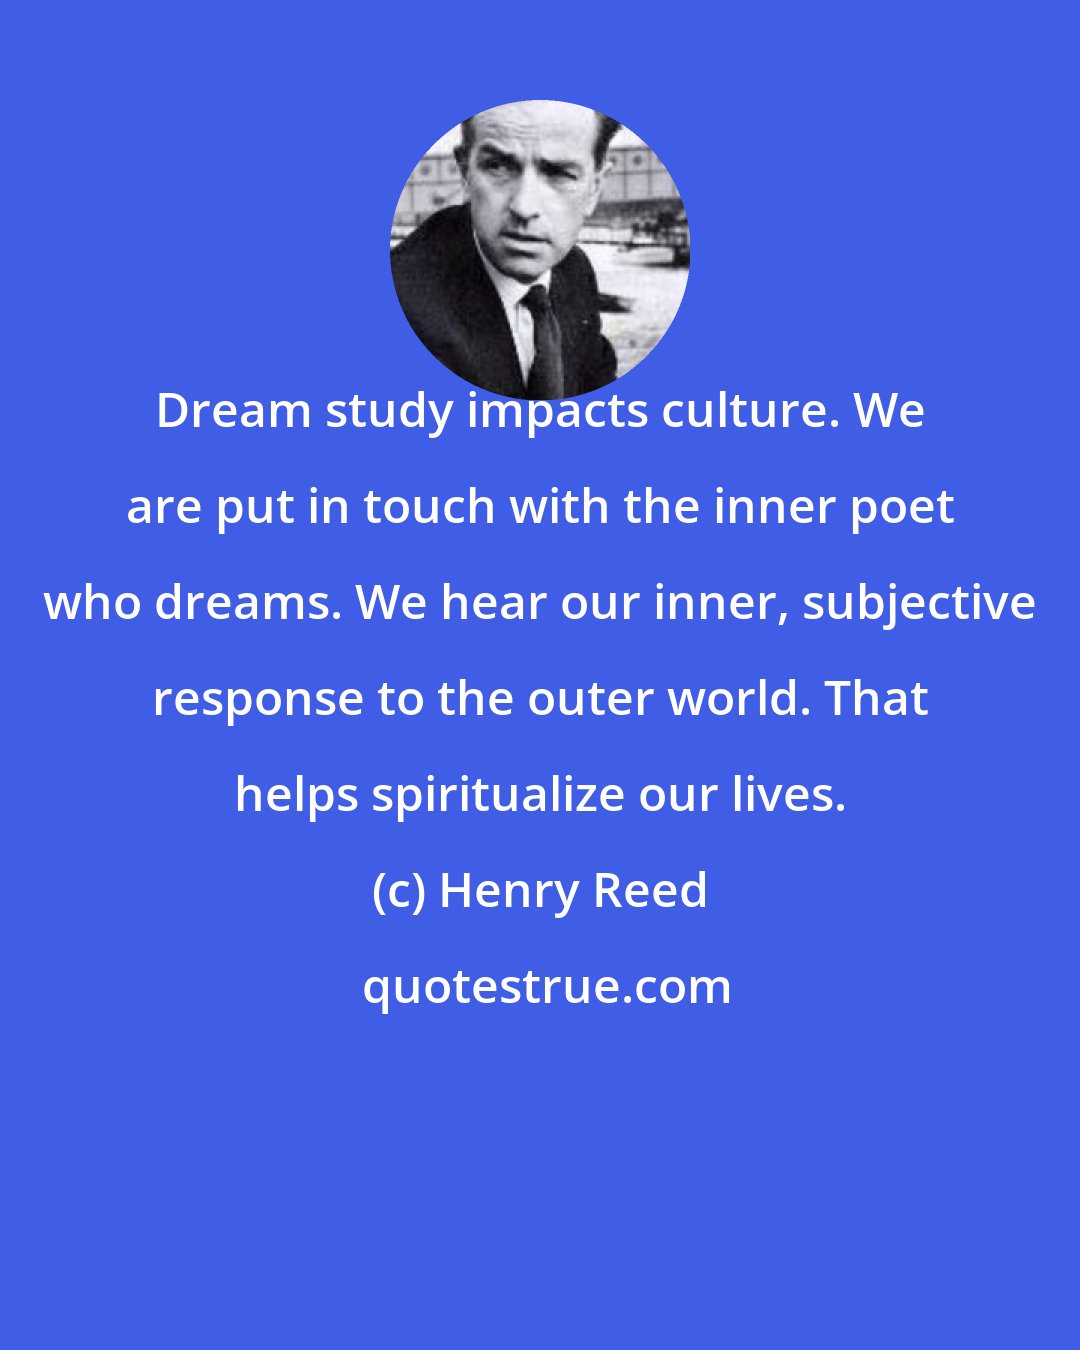 Henry Reed: Dream study impacts culture. We are put in touch with the inner poet who dreams. We hear our inner, subjective response to the outer world. That helps spiritualize our lives.